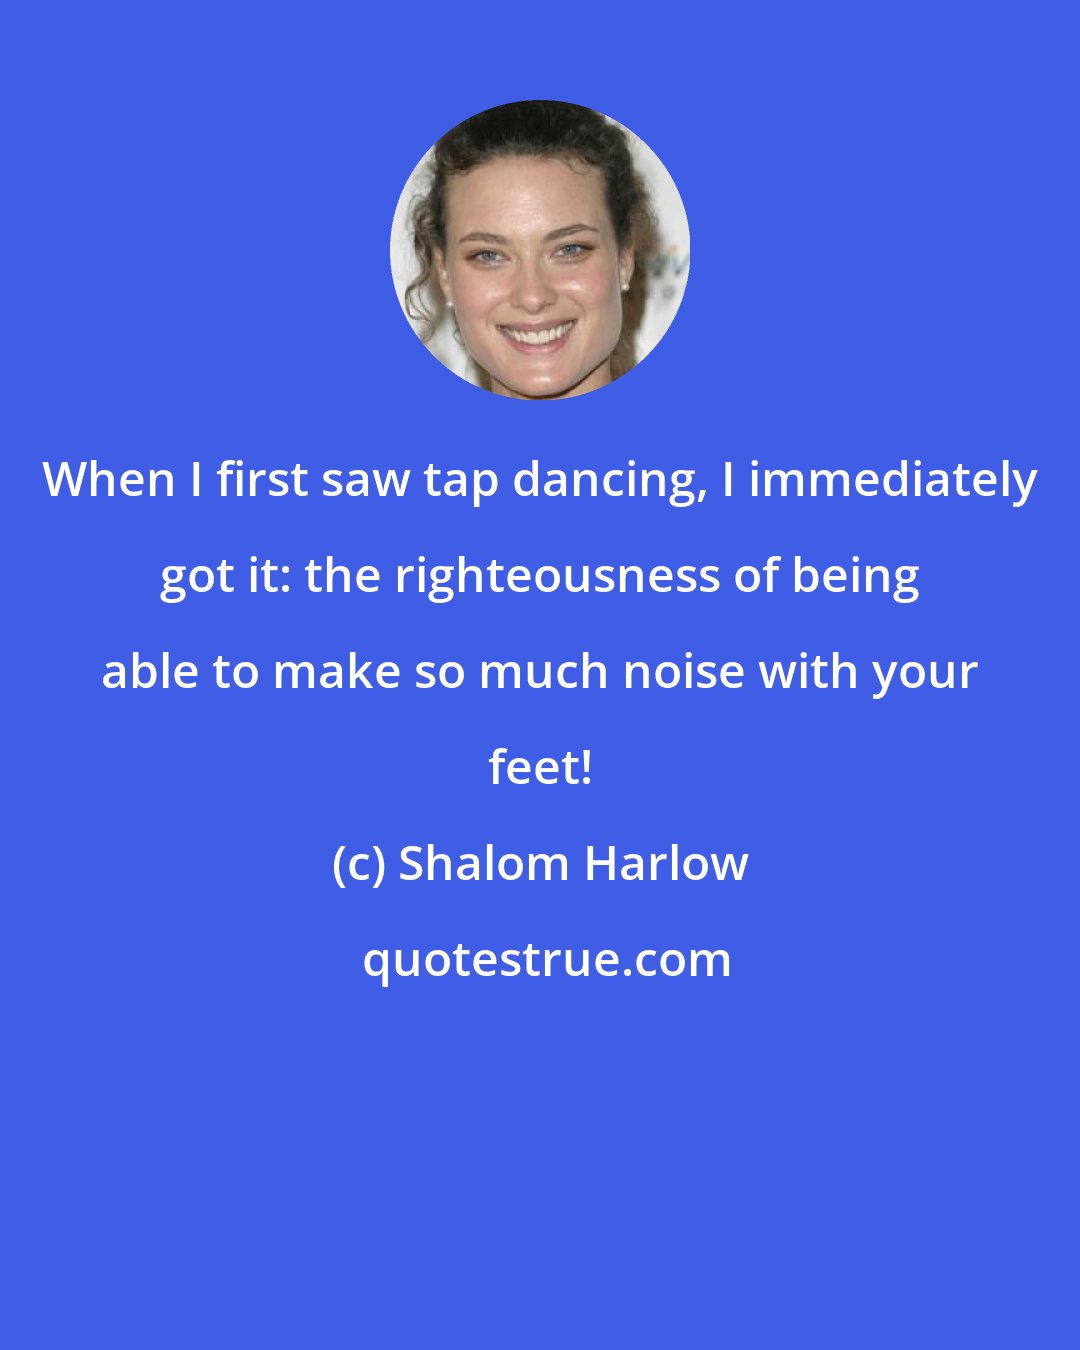 Shalom Harlow: When I first saw tap dancing, I immediately got it: the righteousness of being able to make so much noise with your feet!